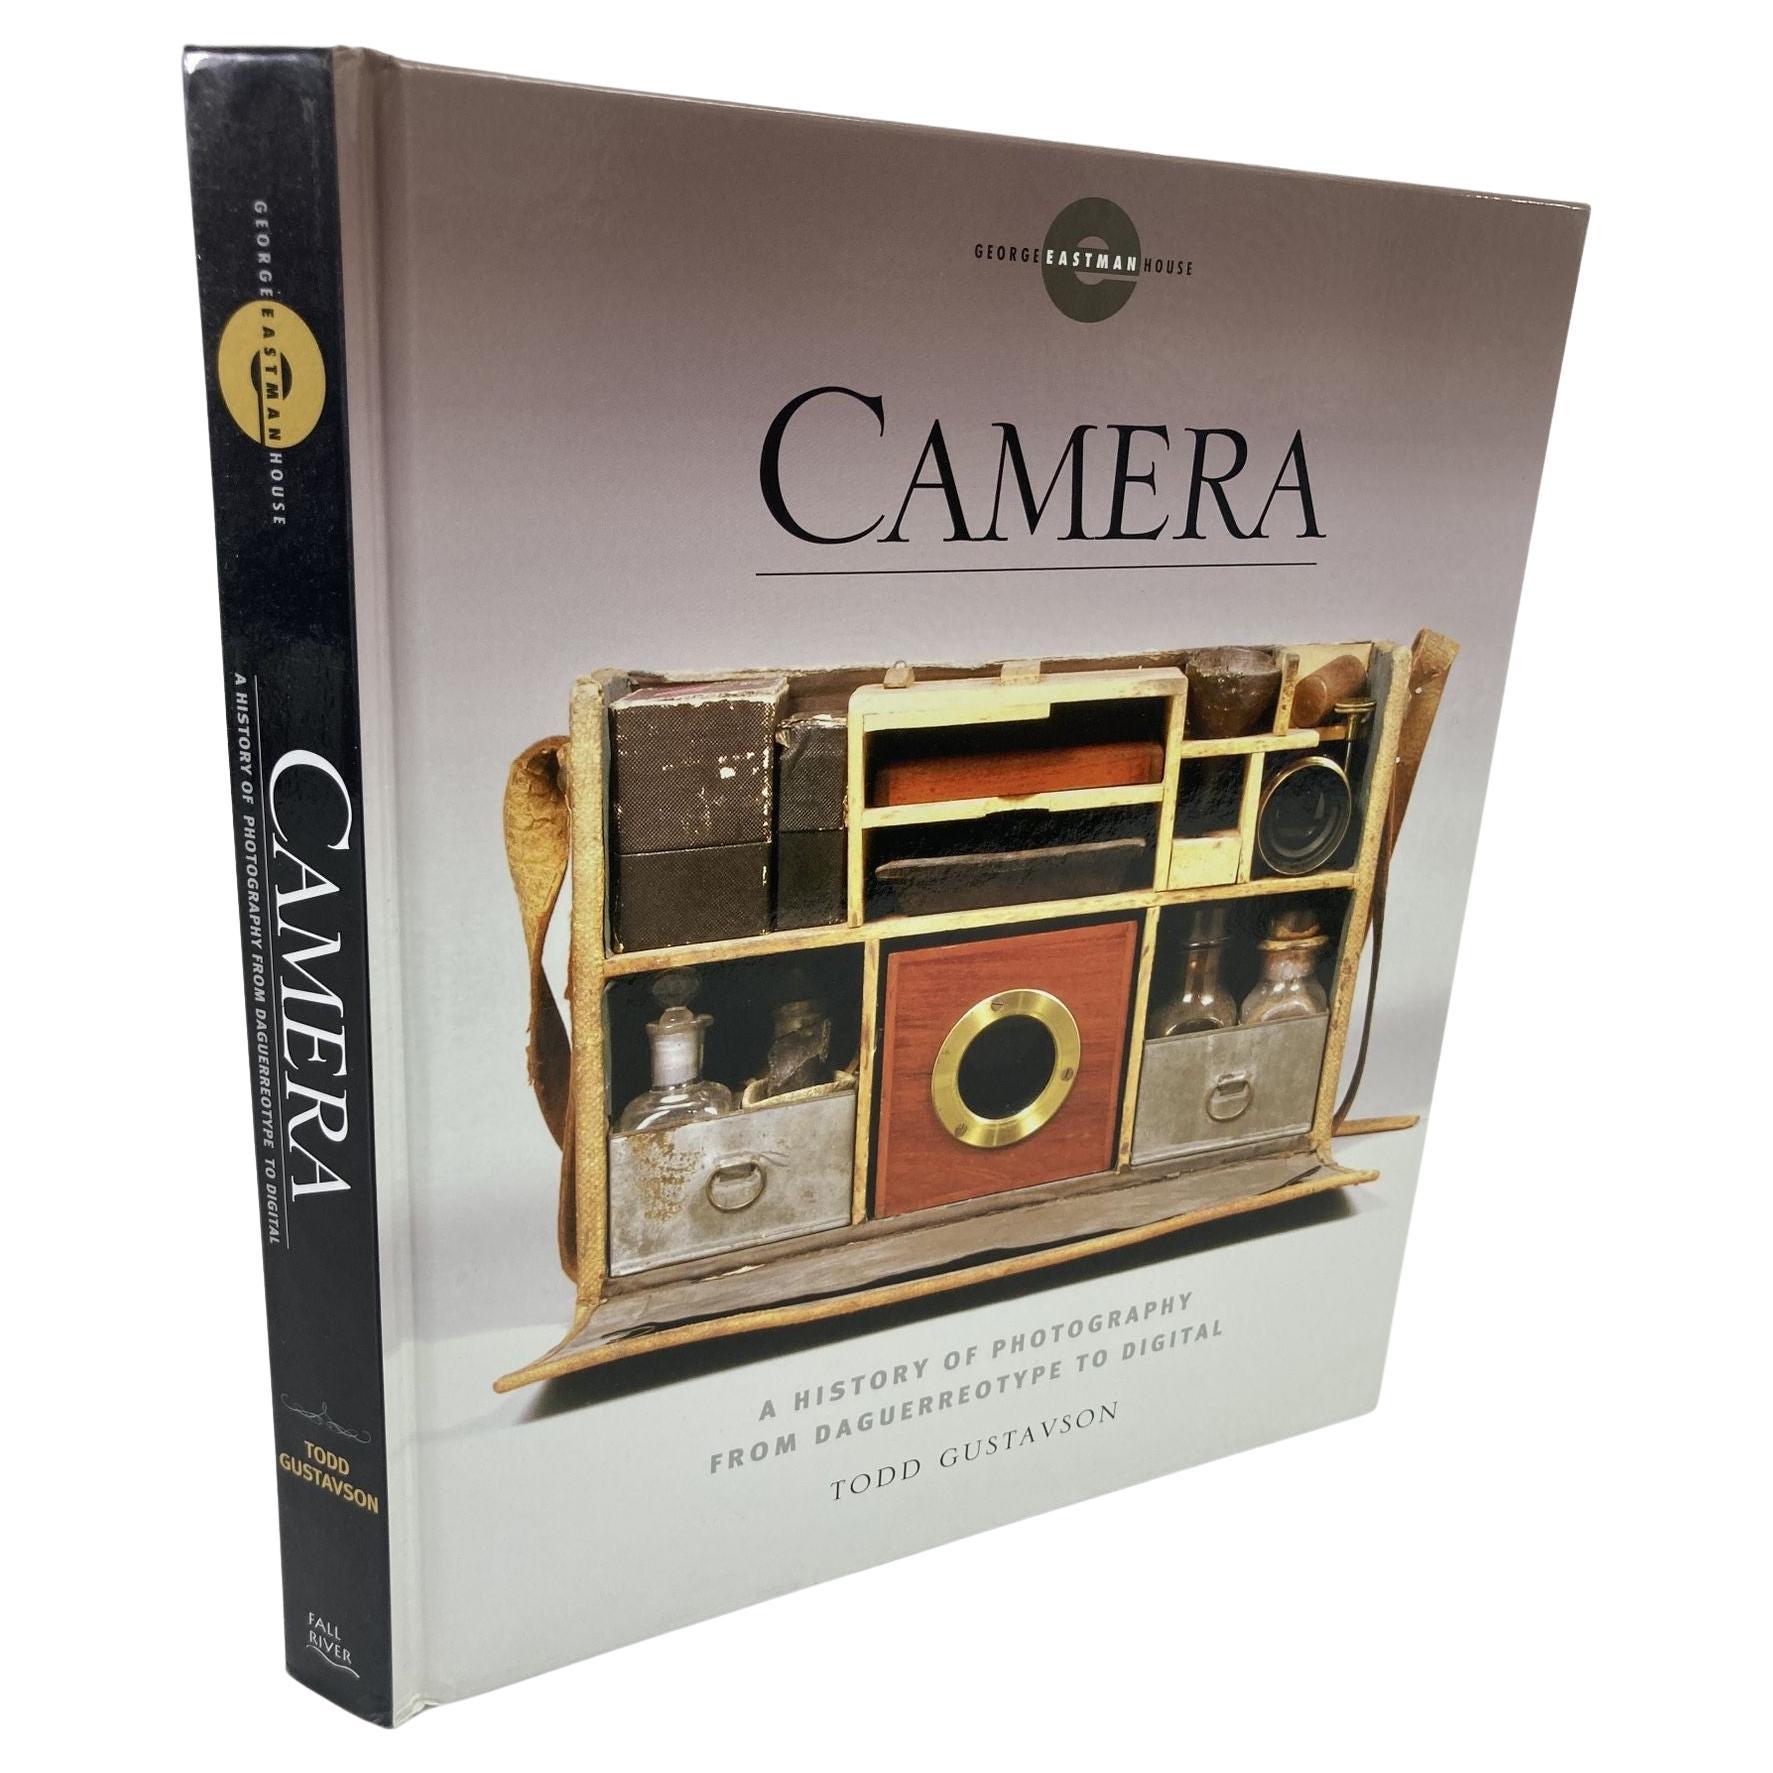 Camera, A History of Photography from Daguerreotype to Digital by Todd Gustavson